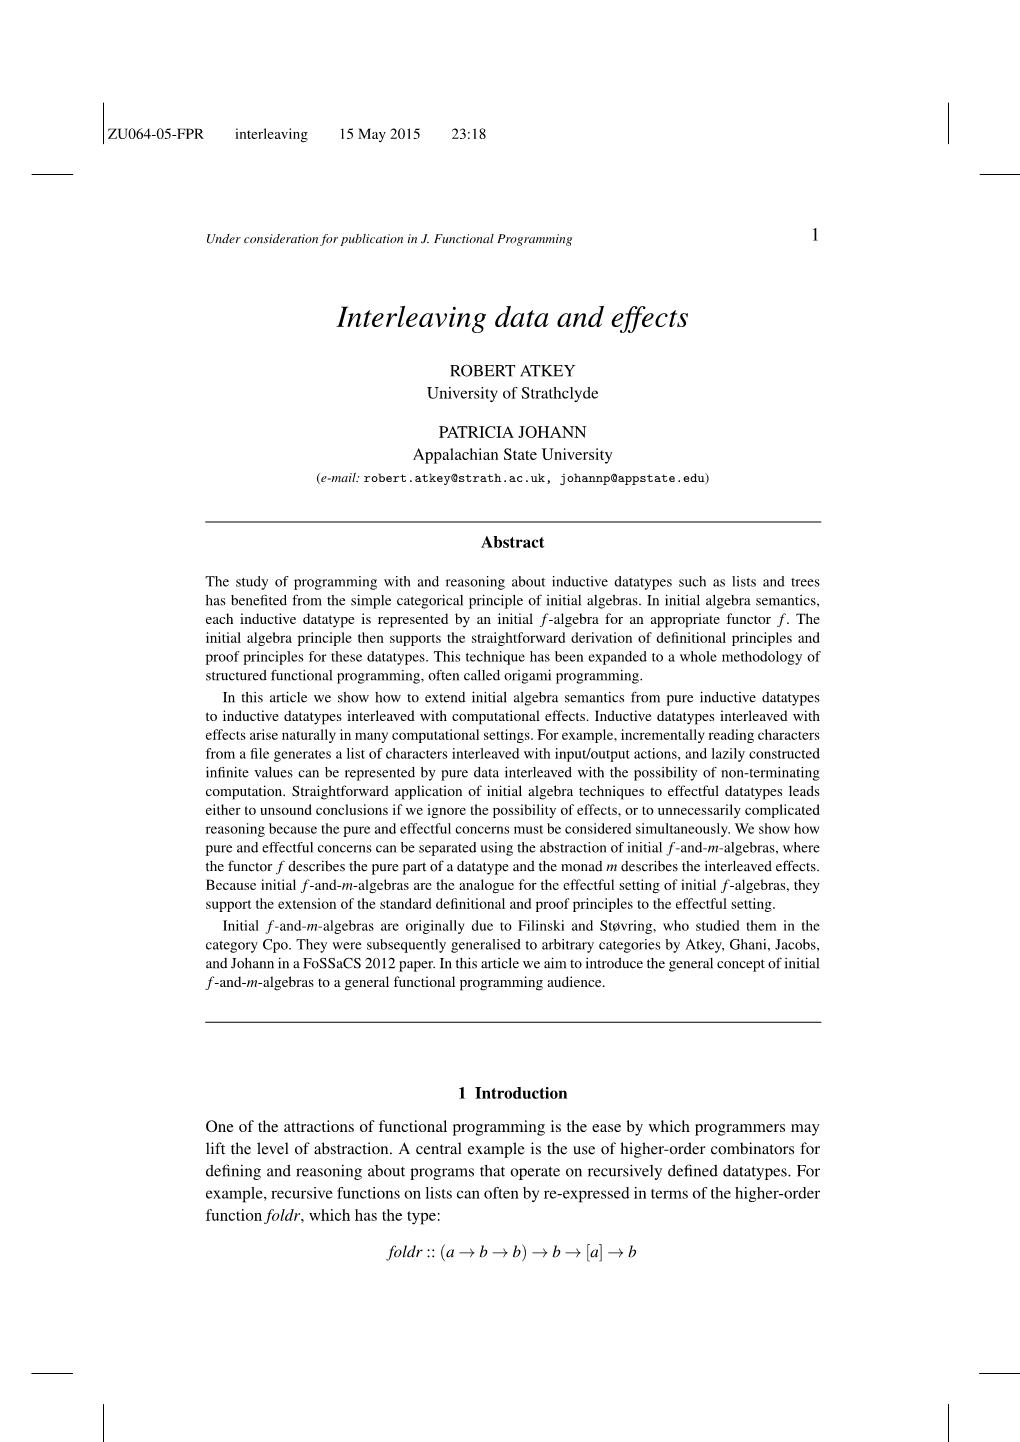 Interleaving Data and Effects